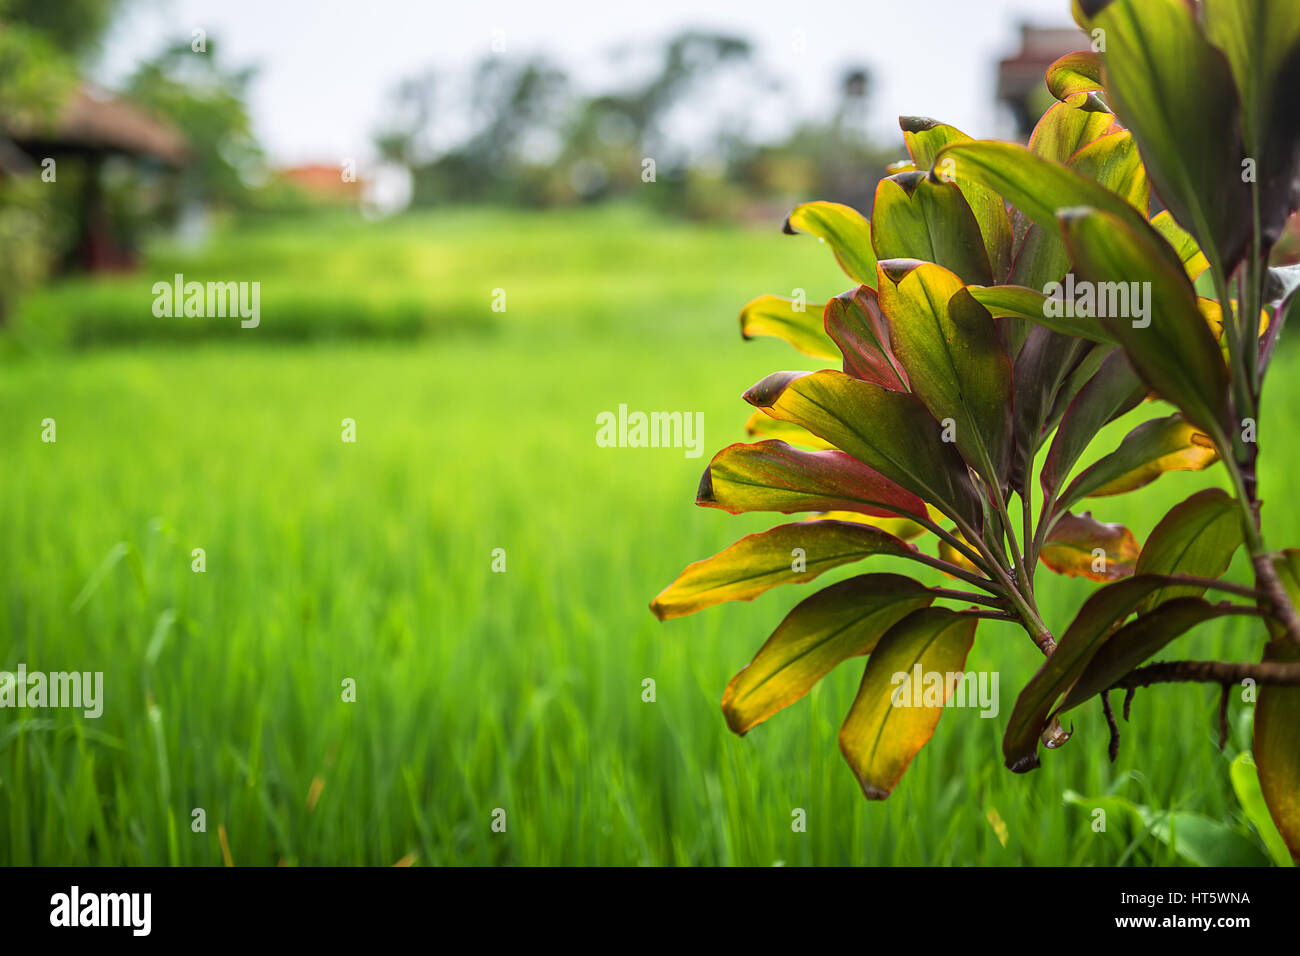 Leaves on the branch of the young palm tree on the blurry background of the green grass and the sky. Outdoors. Closeup. Horizontal. Stock Photo